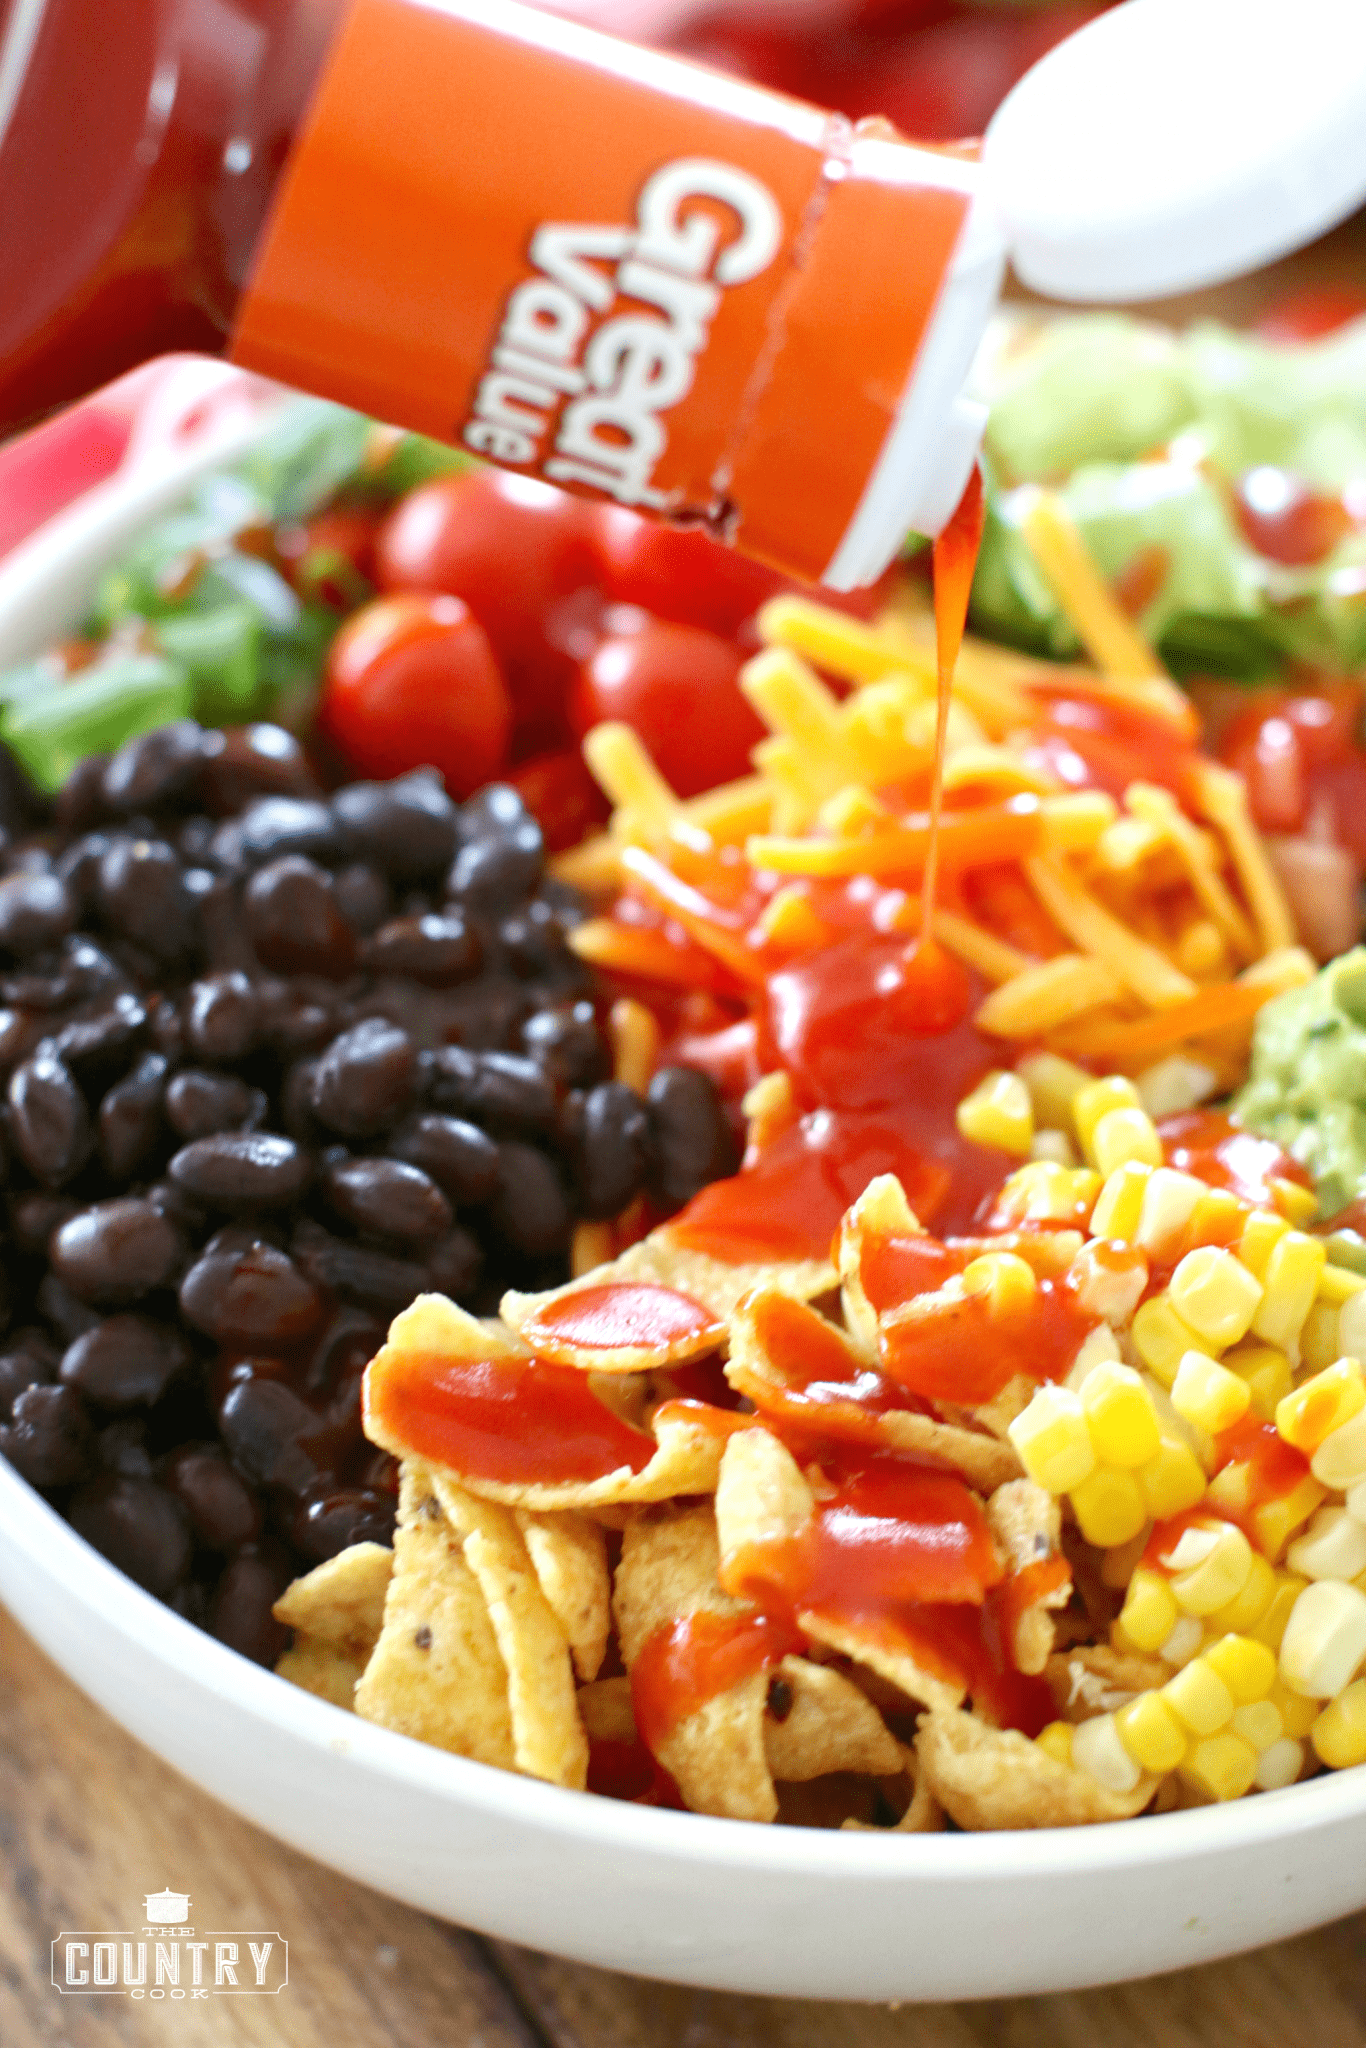 Pouring French dressing over Vegetarian Taco Salad.